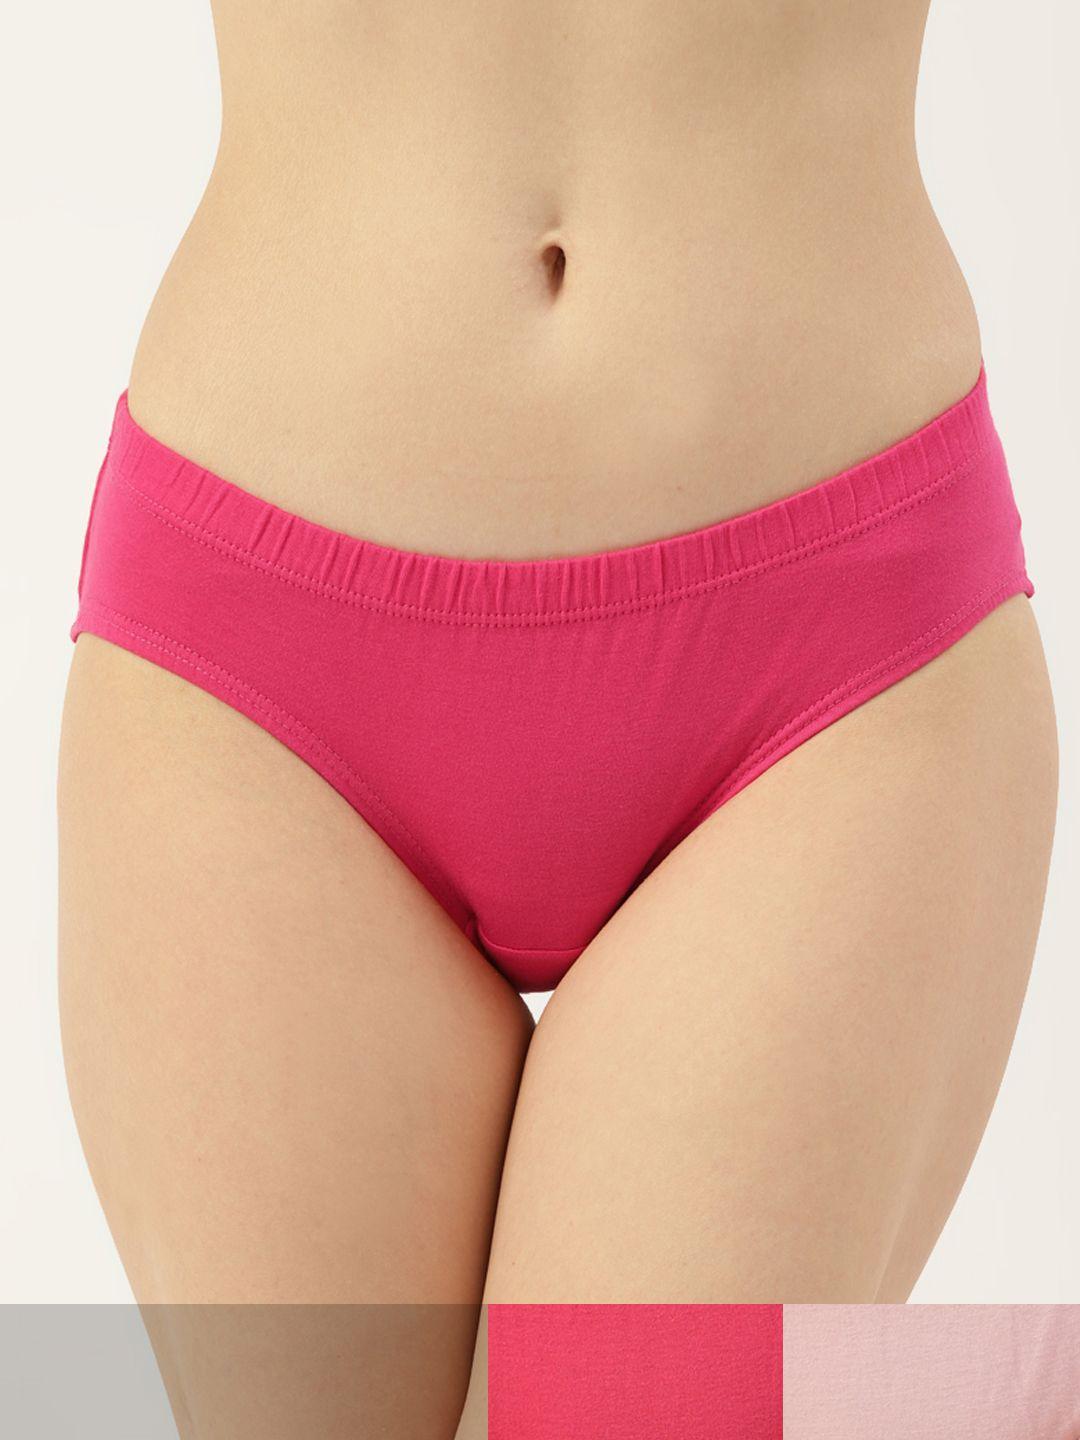 amosio-women-pack-of-3-cotton-solid-mid-rise-hipster-briefs-hp-9031-3